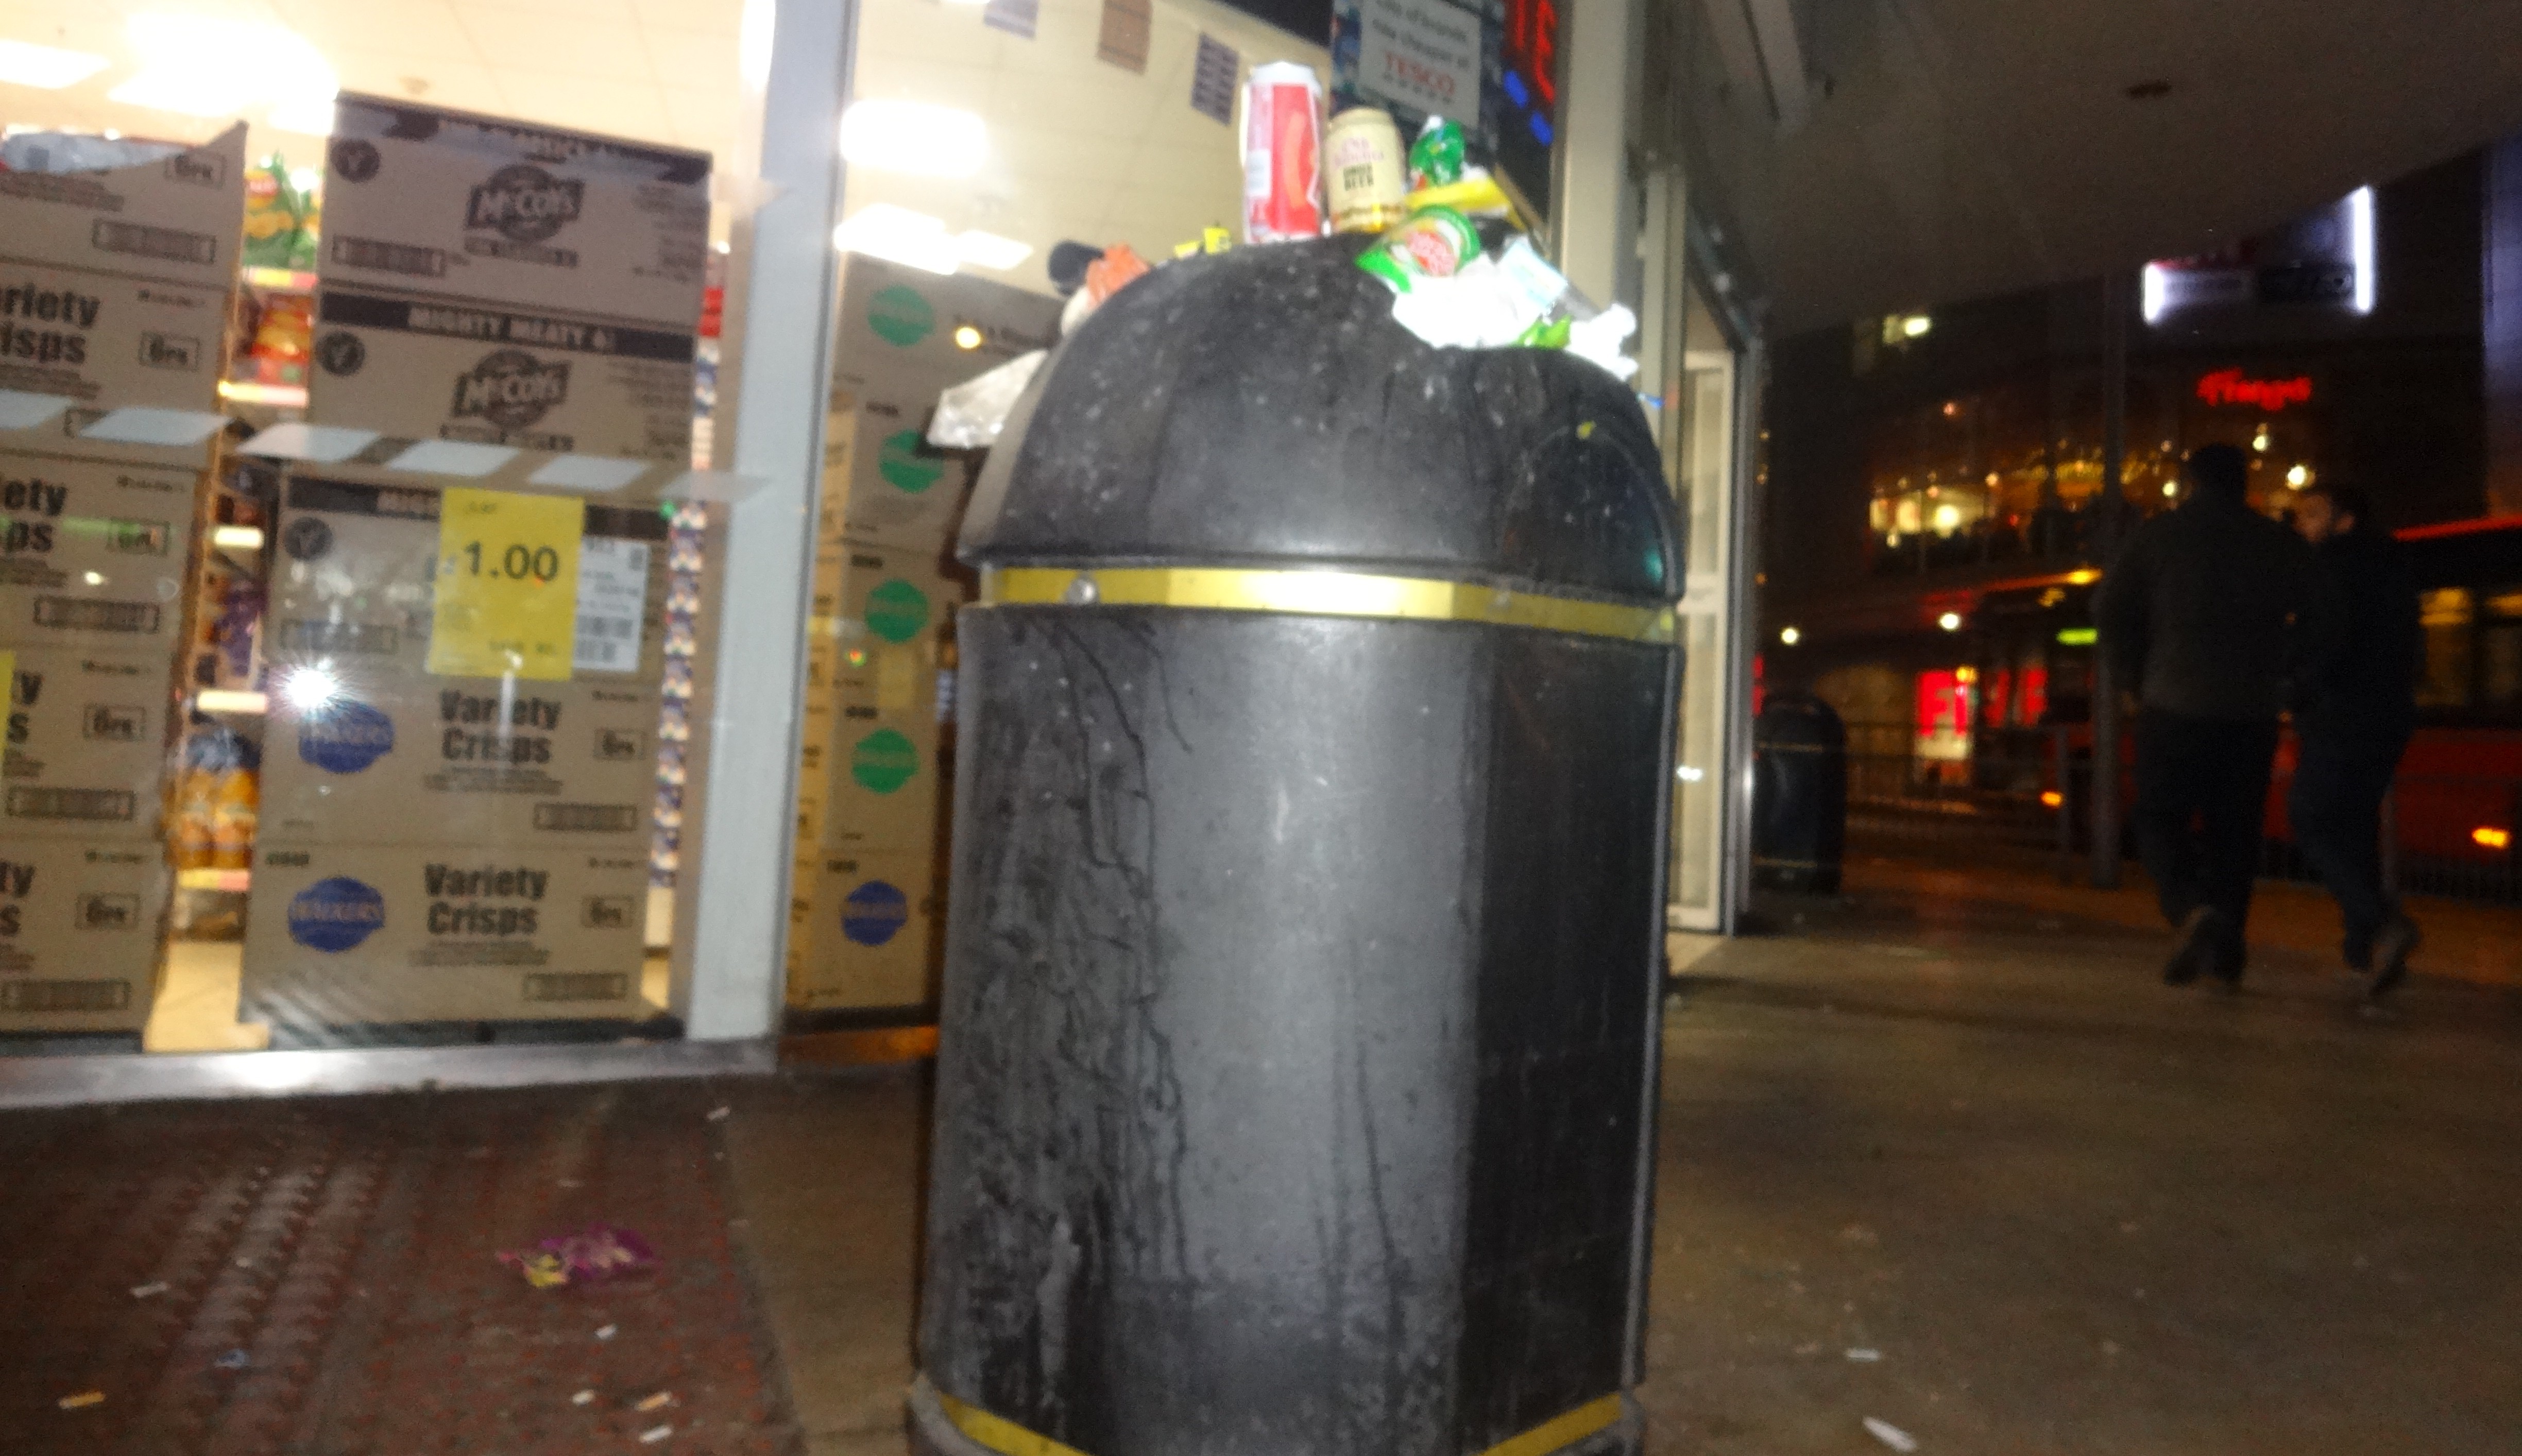 Tesco manager blames messy students for overflowing bins in Kingston town centre